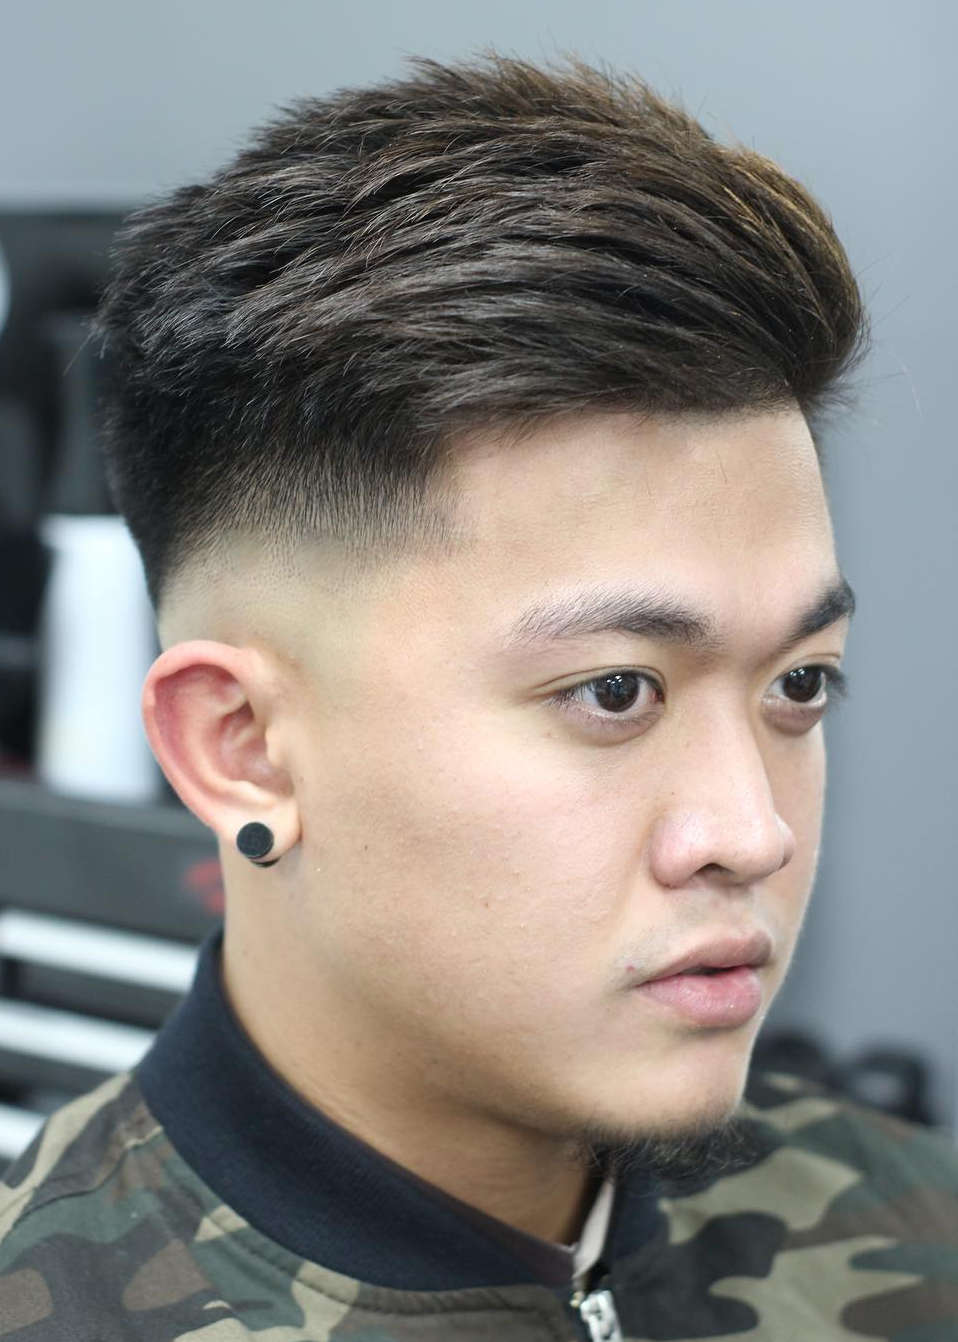 A drop fade haircut features a longer top and shorter sides that contrast